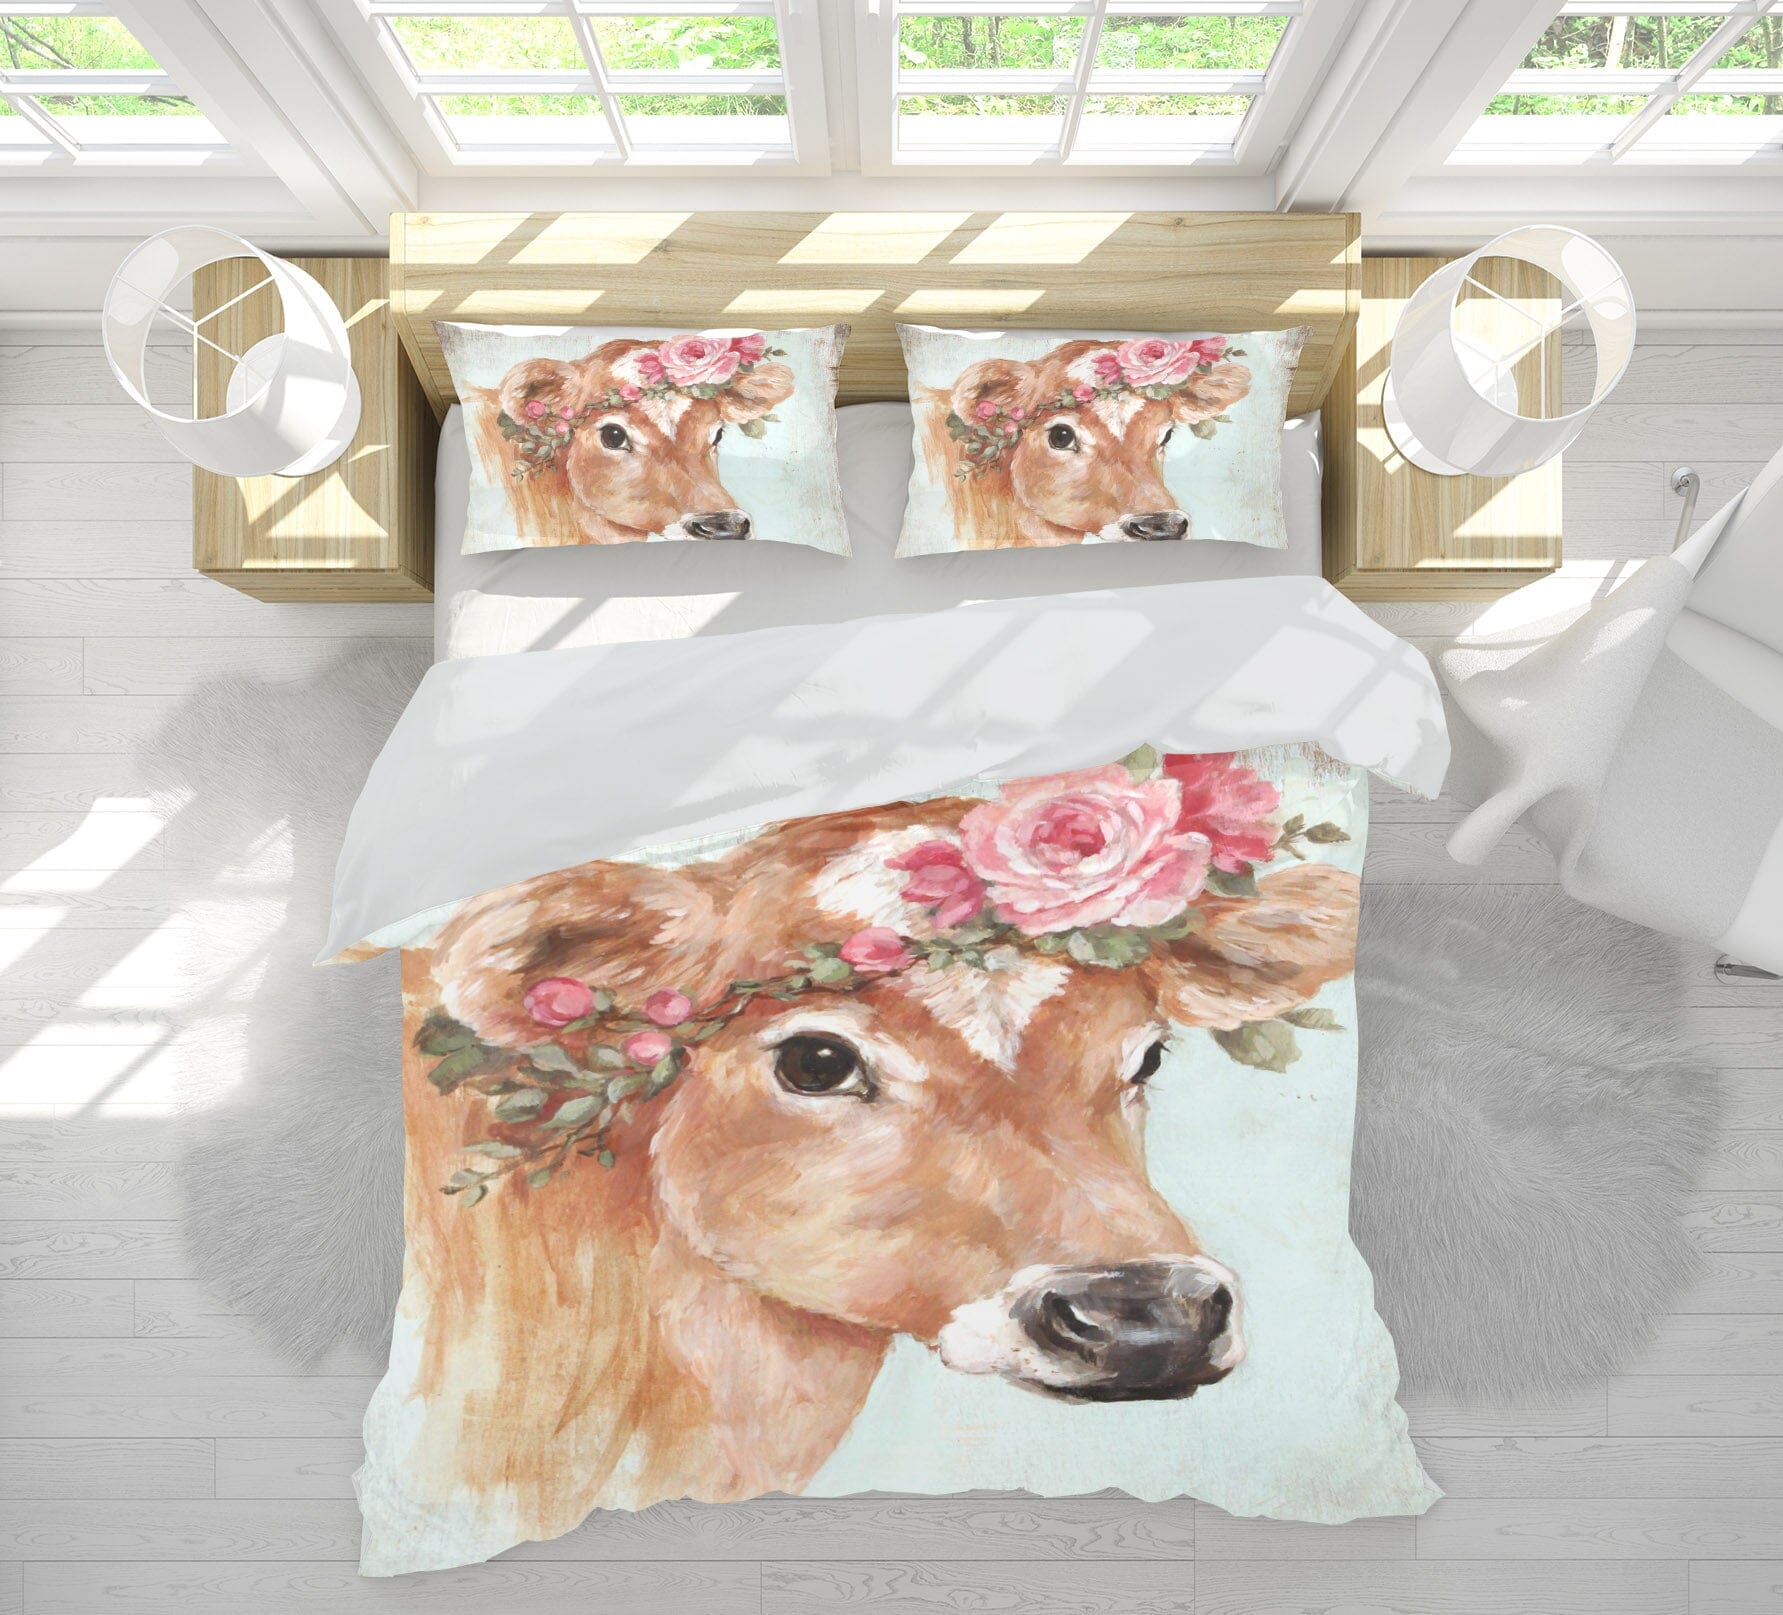 3D Cow Horse 038 Debi Coules Bedding Bed Pillowcases Quilt Quiet Covers AJ Creativity Home 